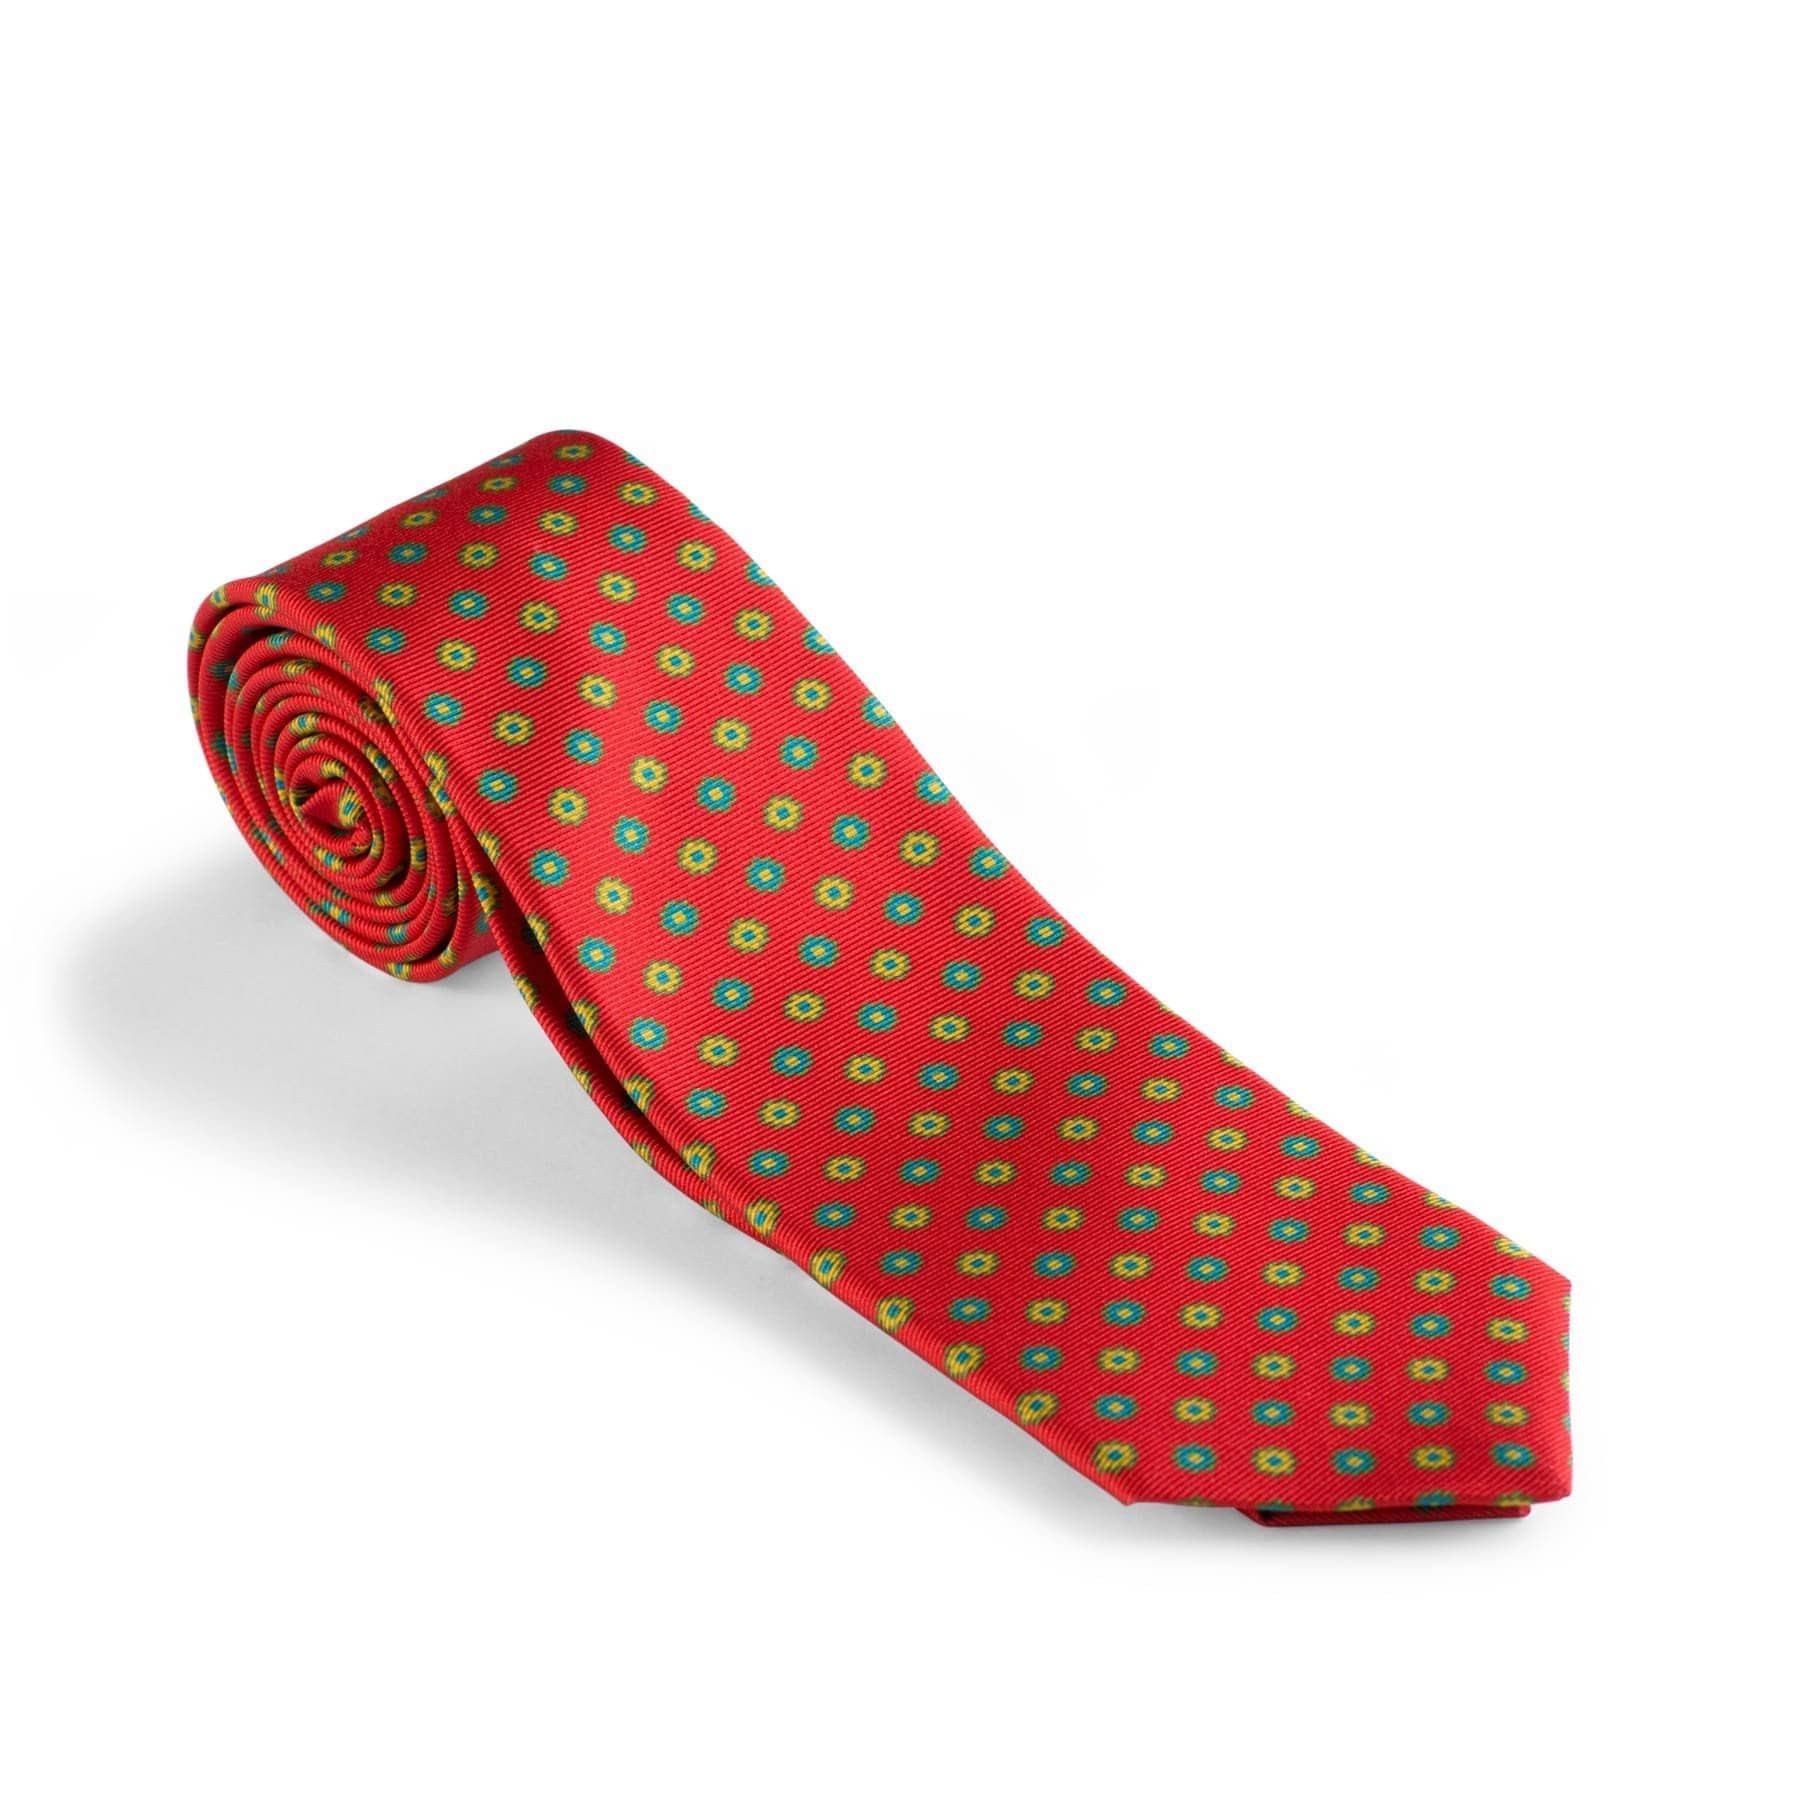 100% Red Silk Tie - AXEL'S